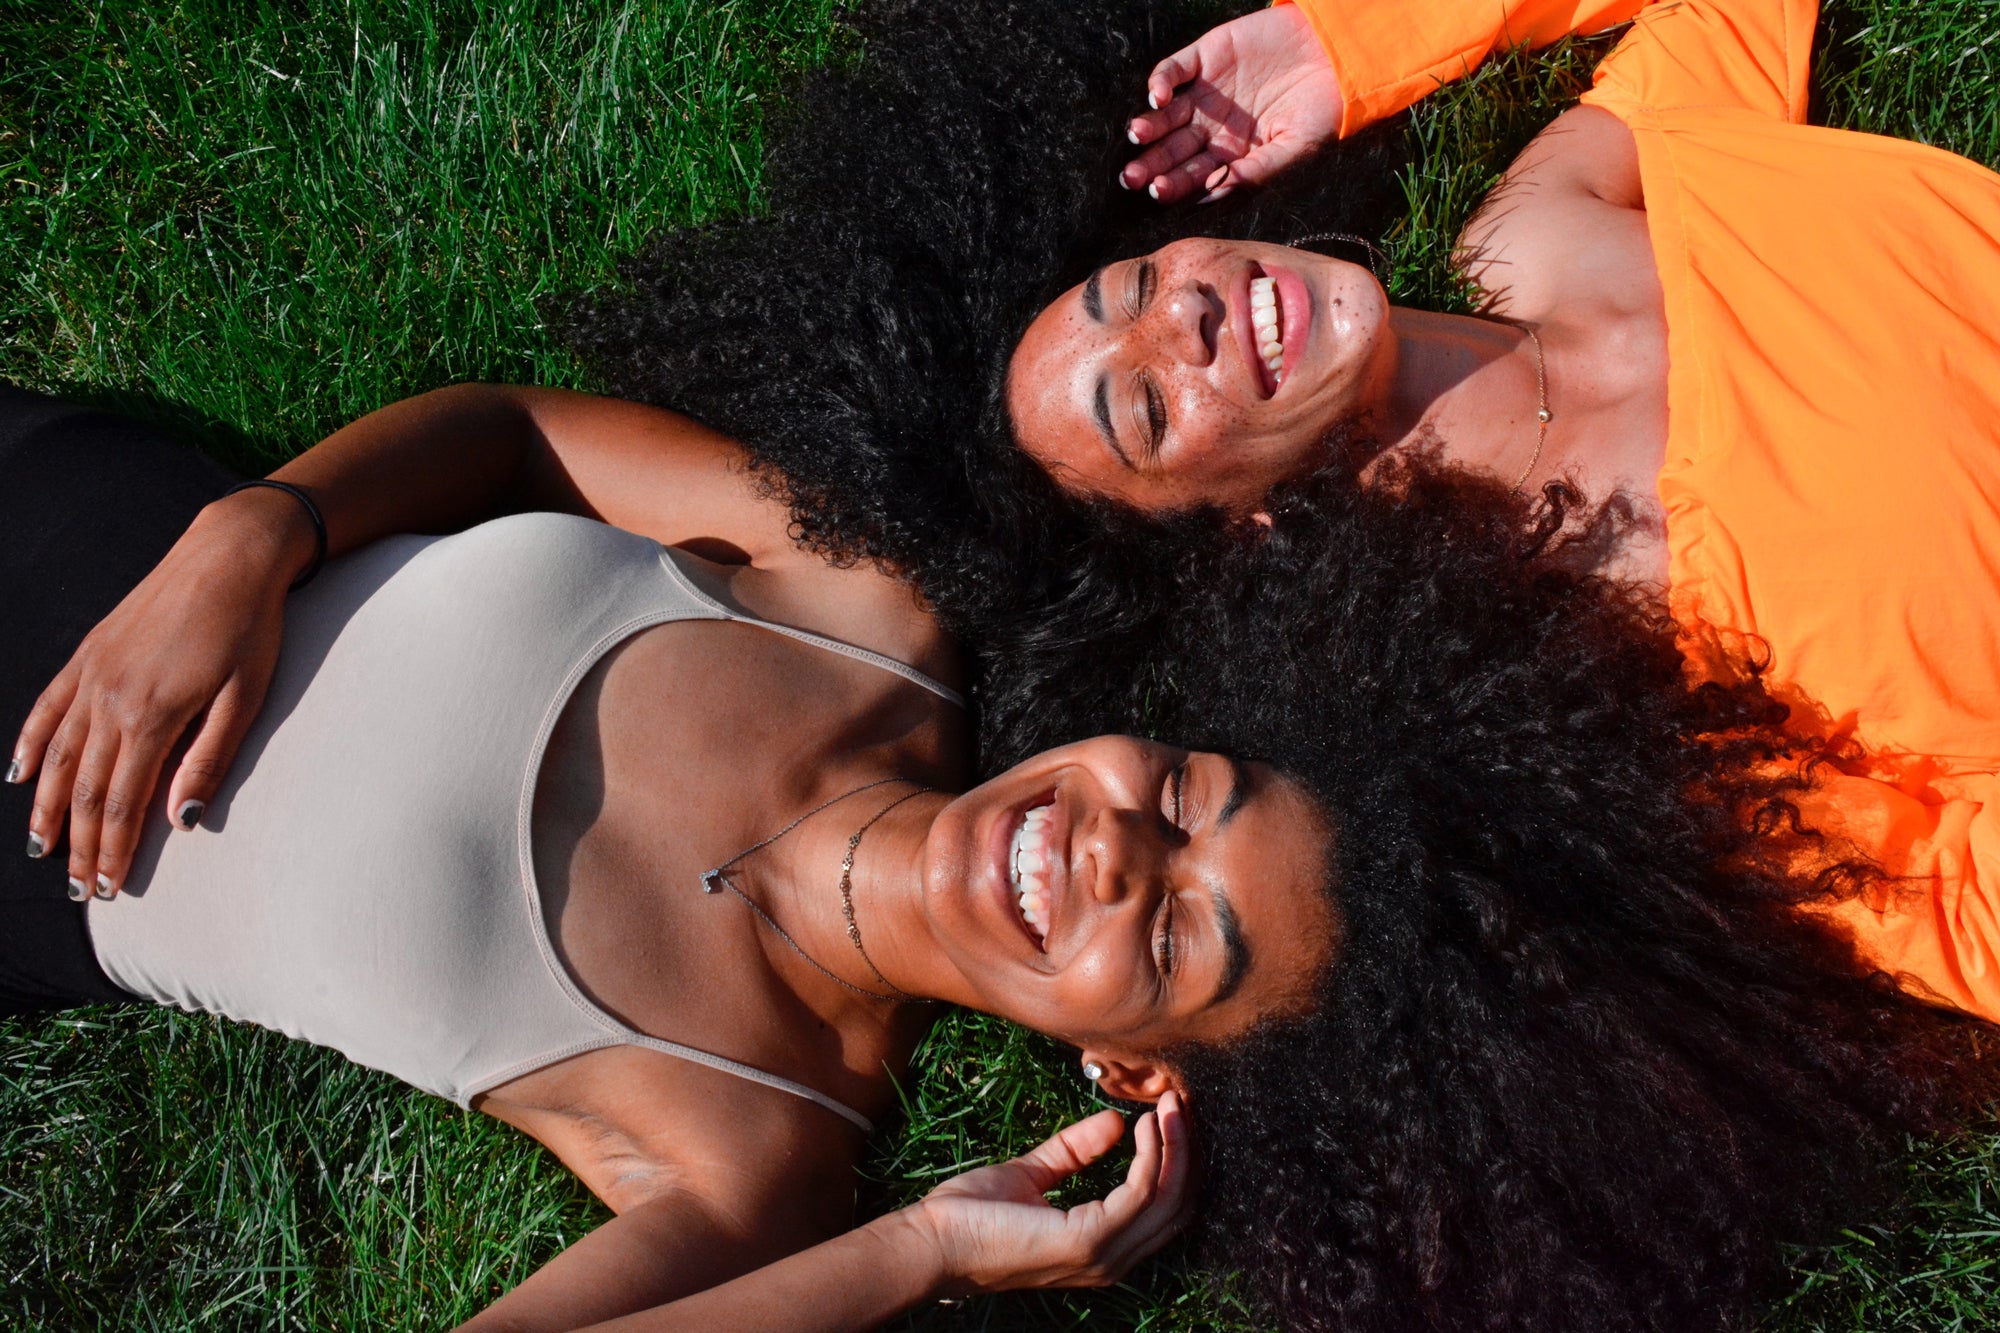 two women laughing outside on grass